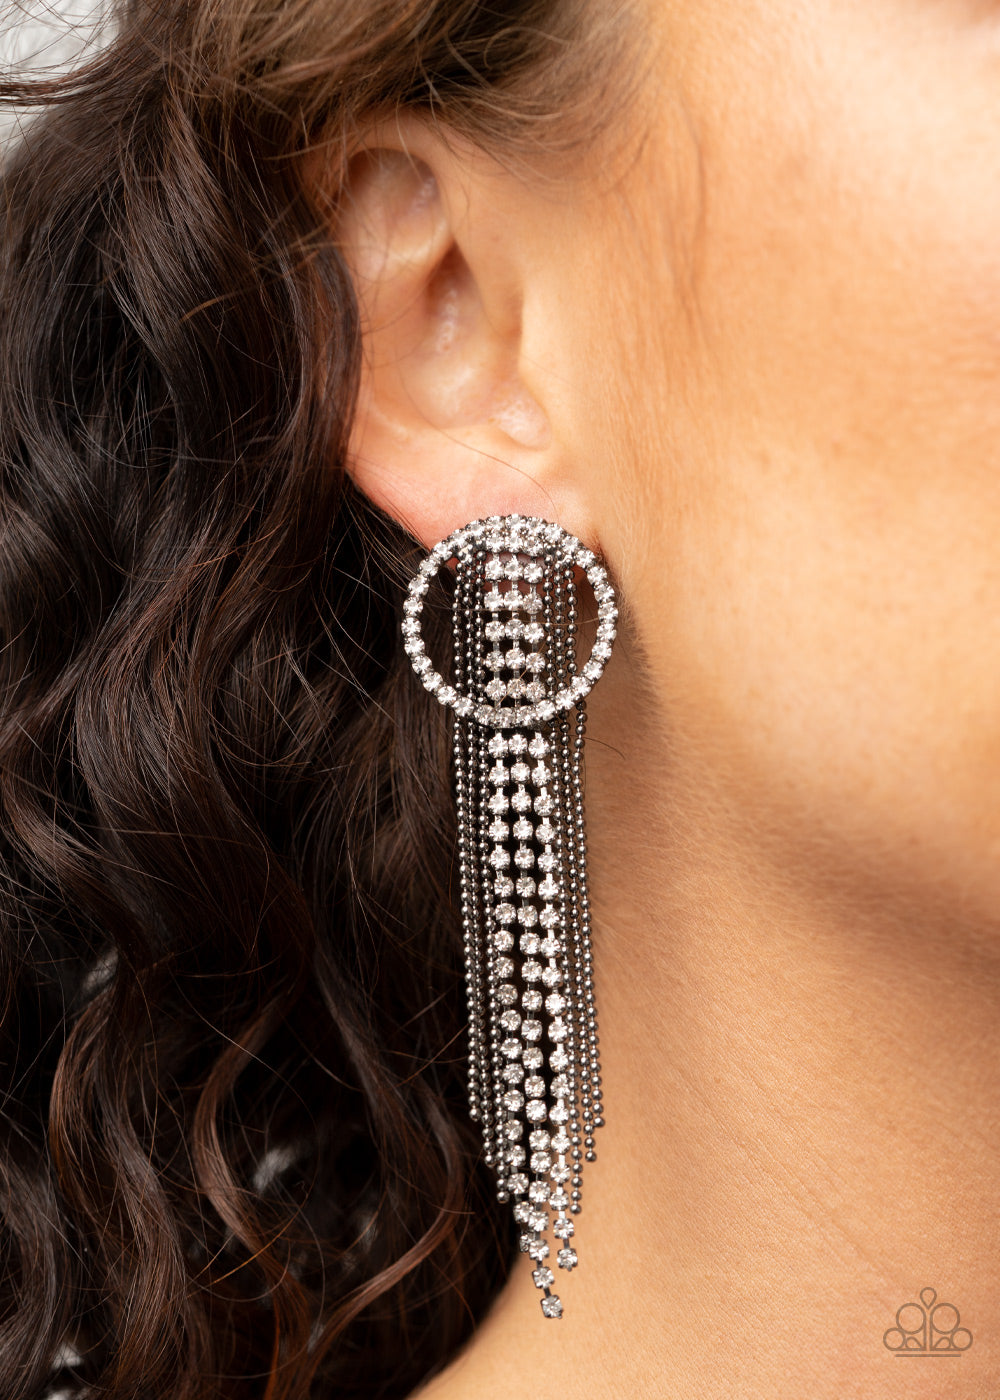 Dazzle by Default Black Earring - Paparazzi Accessories  Dainty strands of glassy white rhinestones and shimmery gunmetal ball-chain stream from the top of a bedazzled white rhinestone hoop, creating a dazzling fringe. Earring attaches to a standard post fitting.  ﻿All Paparazzi Accessories are lead free and nickel free!  Sold as one pair of post earrings.